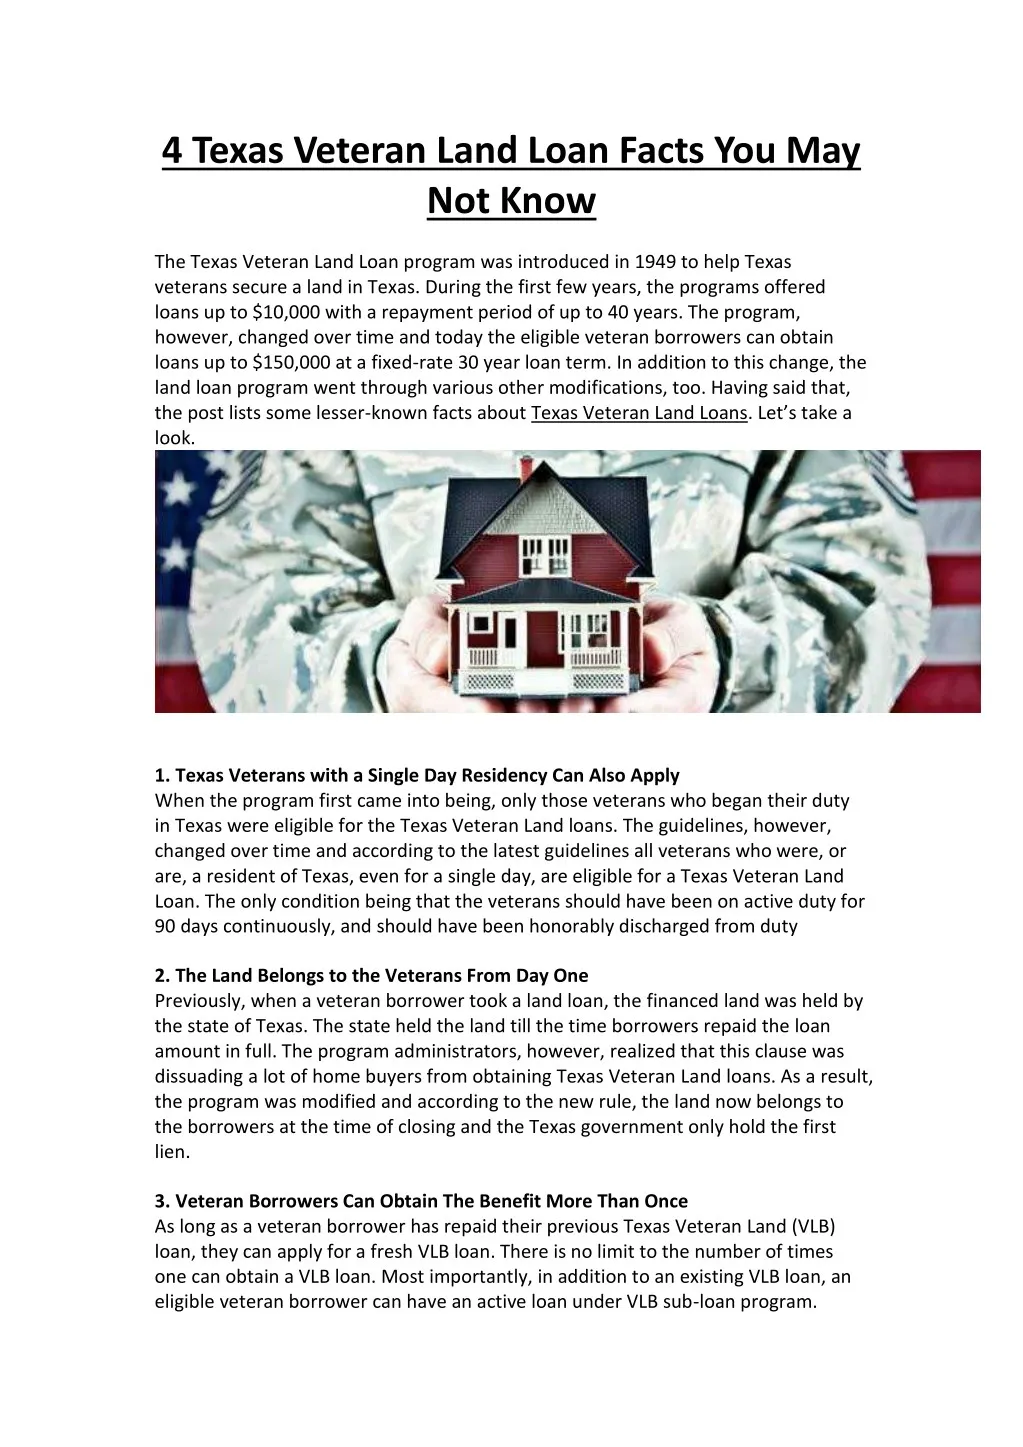 4 texas veteran land loan facts you may not know